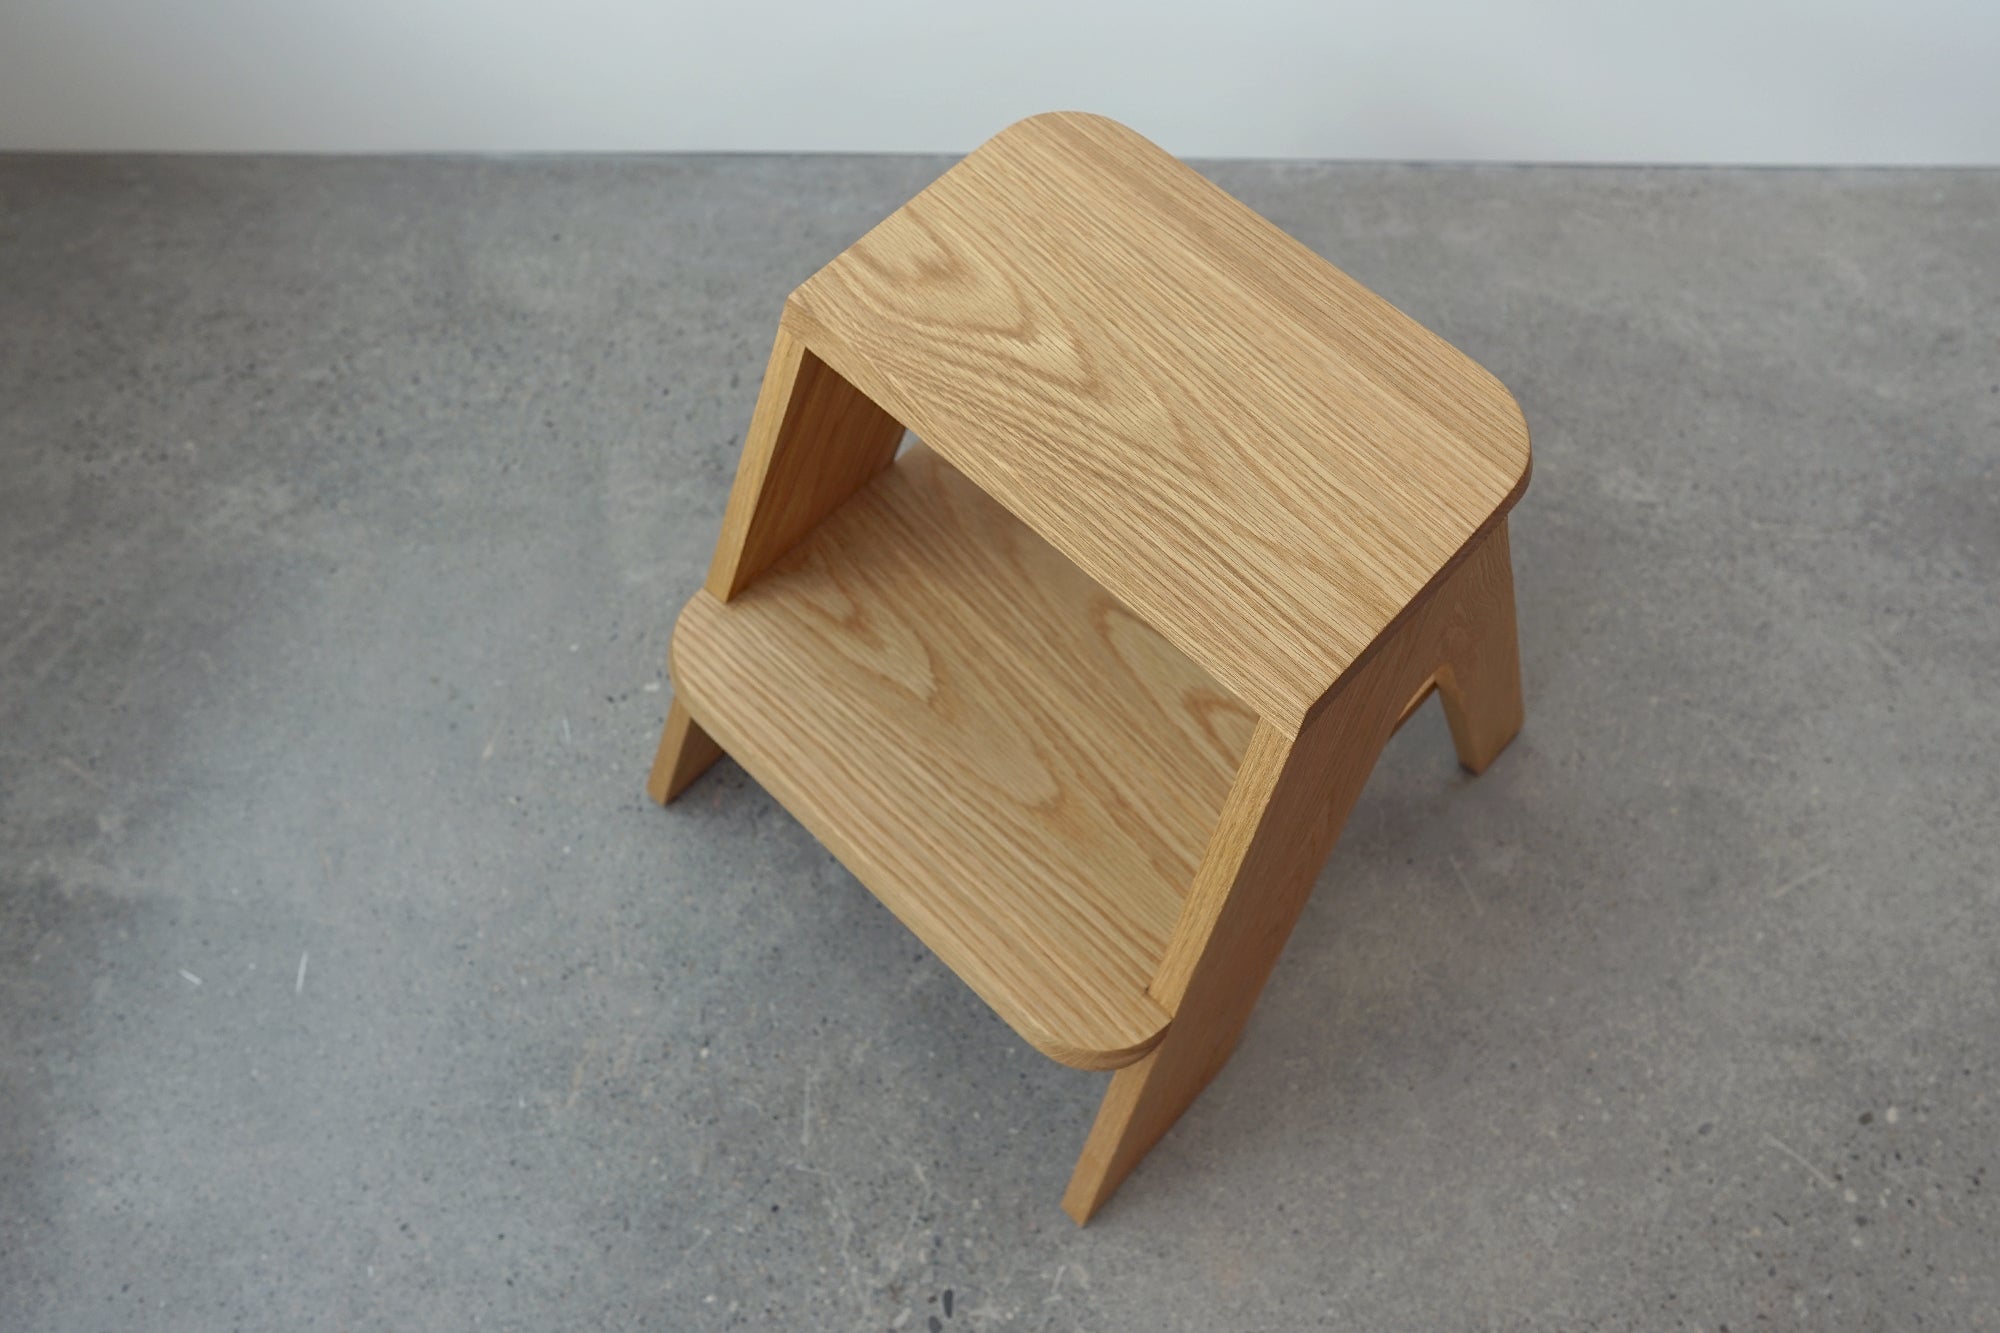 The 'Two Step' Stool